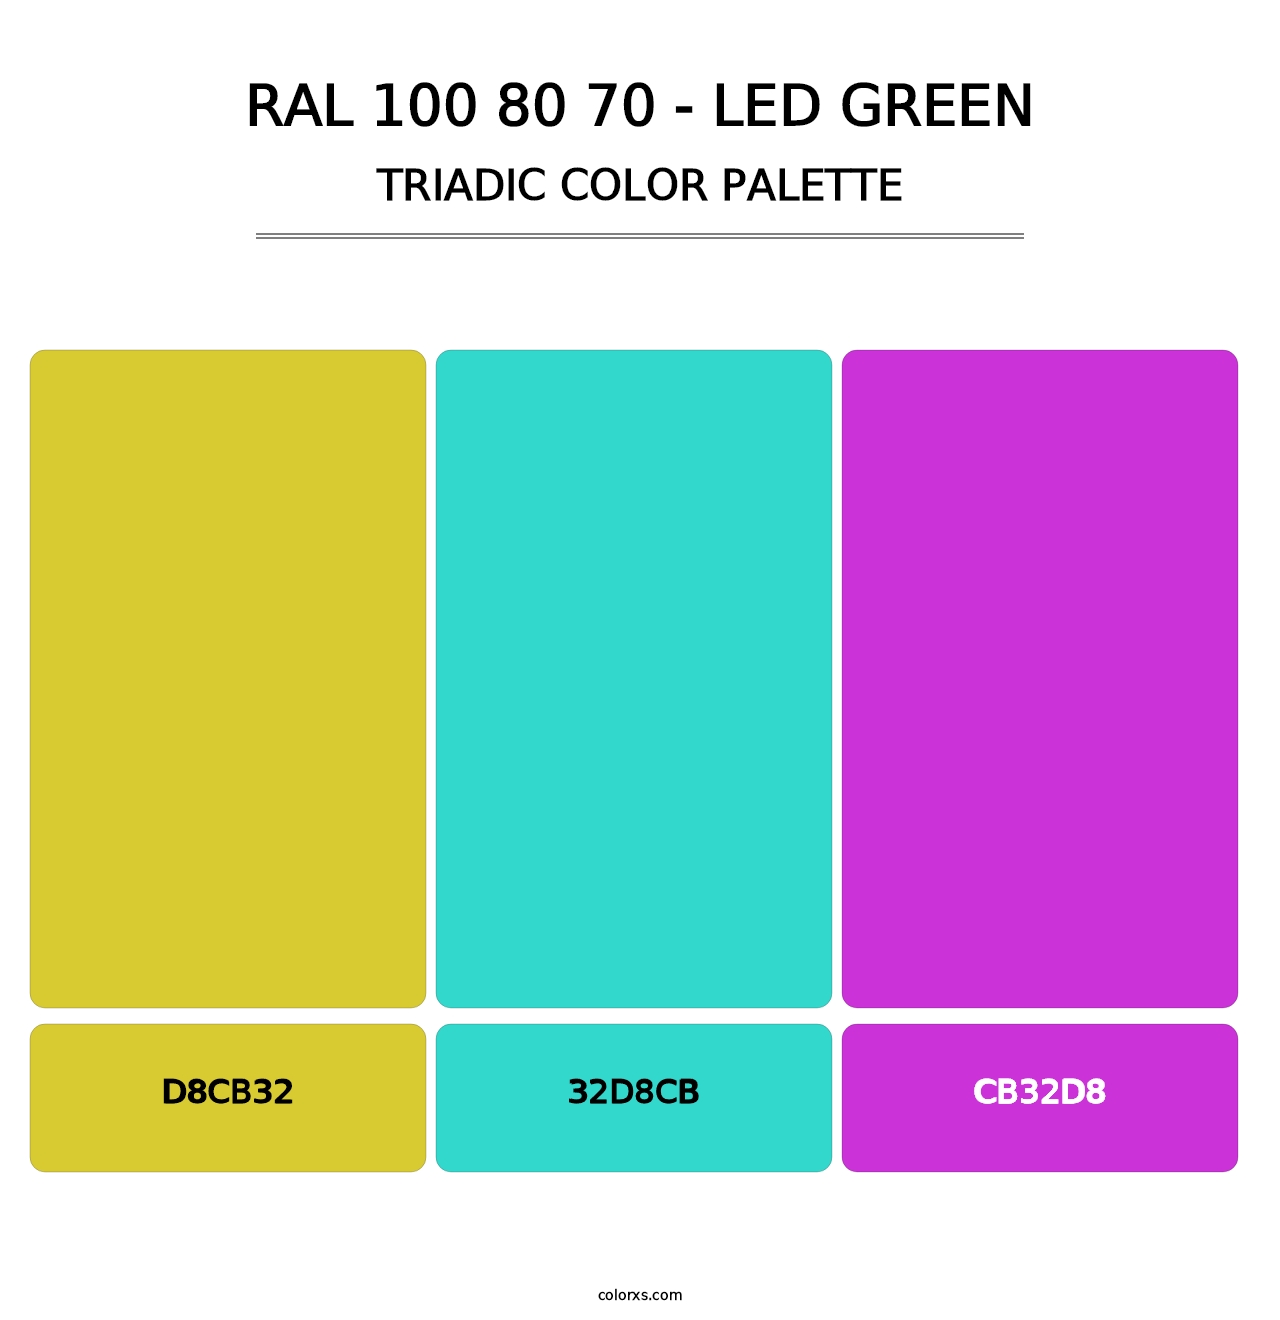 RAL 100 80 70 - LED Green - Triadic Color Palette